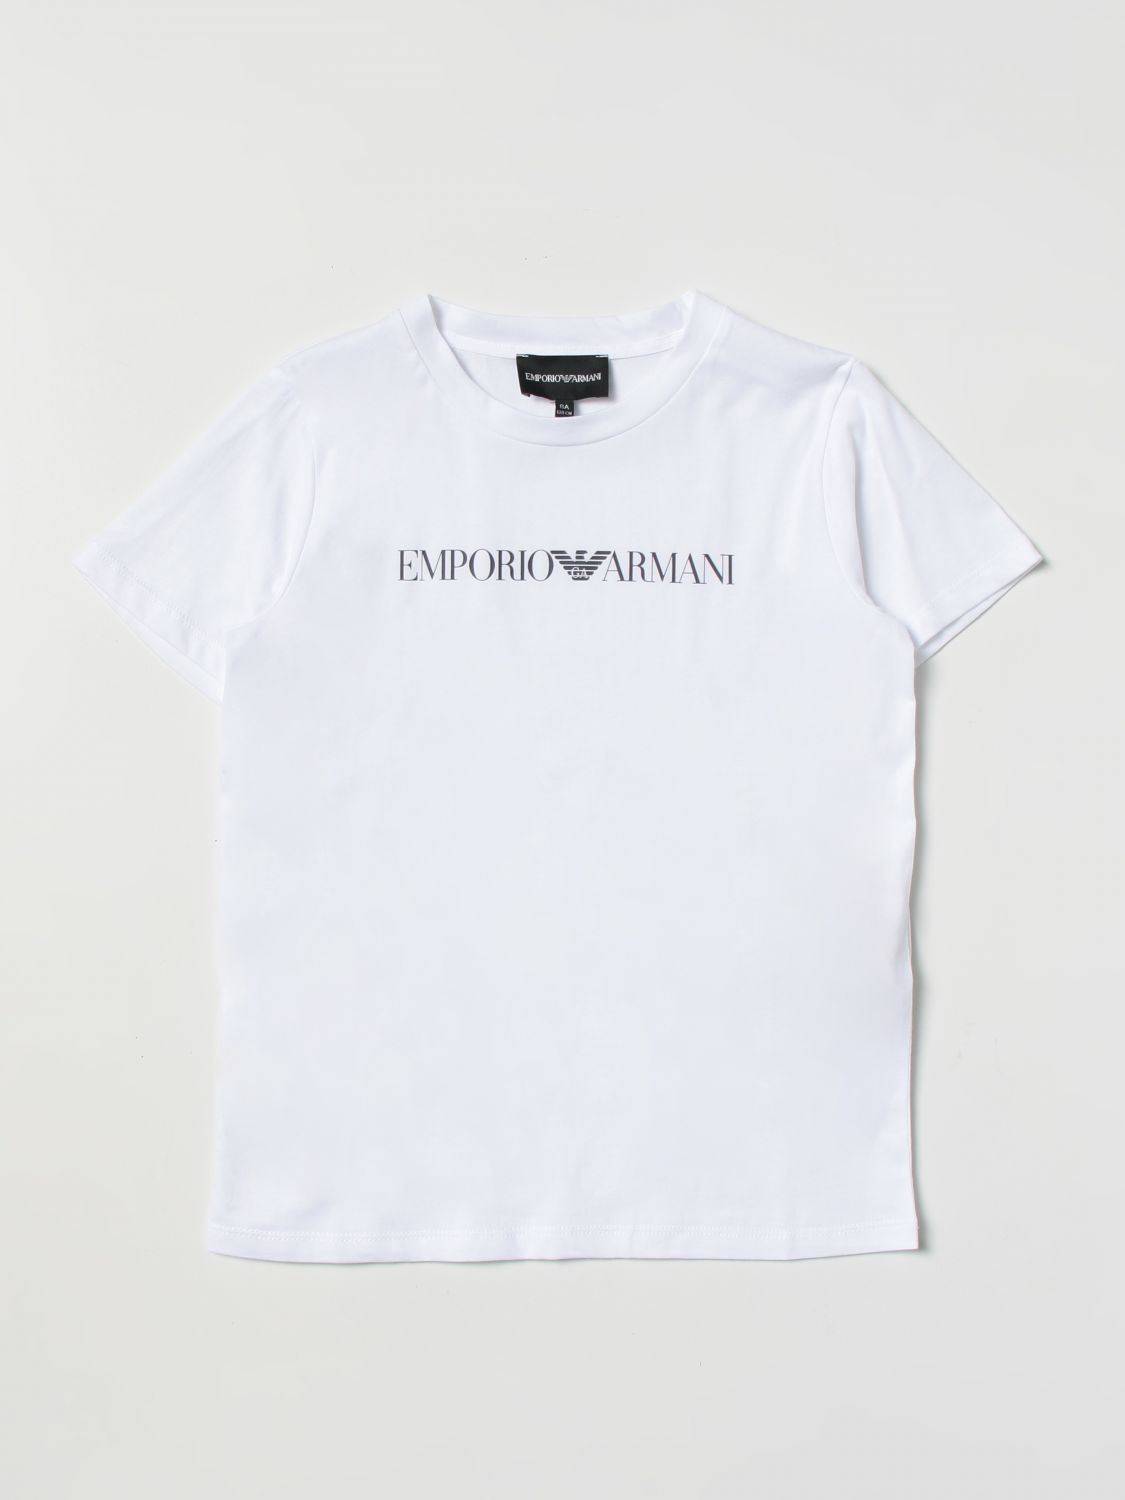 Emporio Armani T-shirt  Kids Kinder Farbe Weiss 1 In White 1